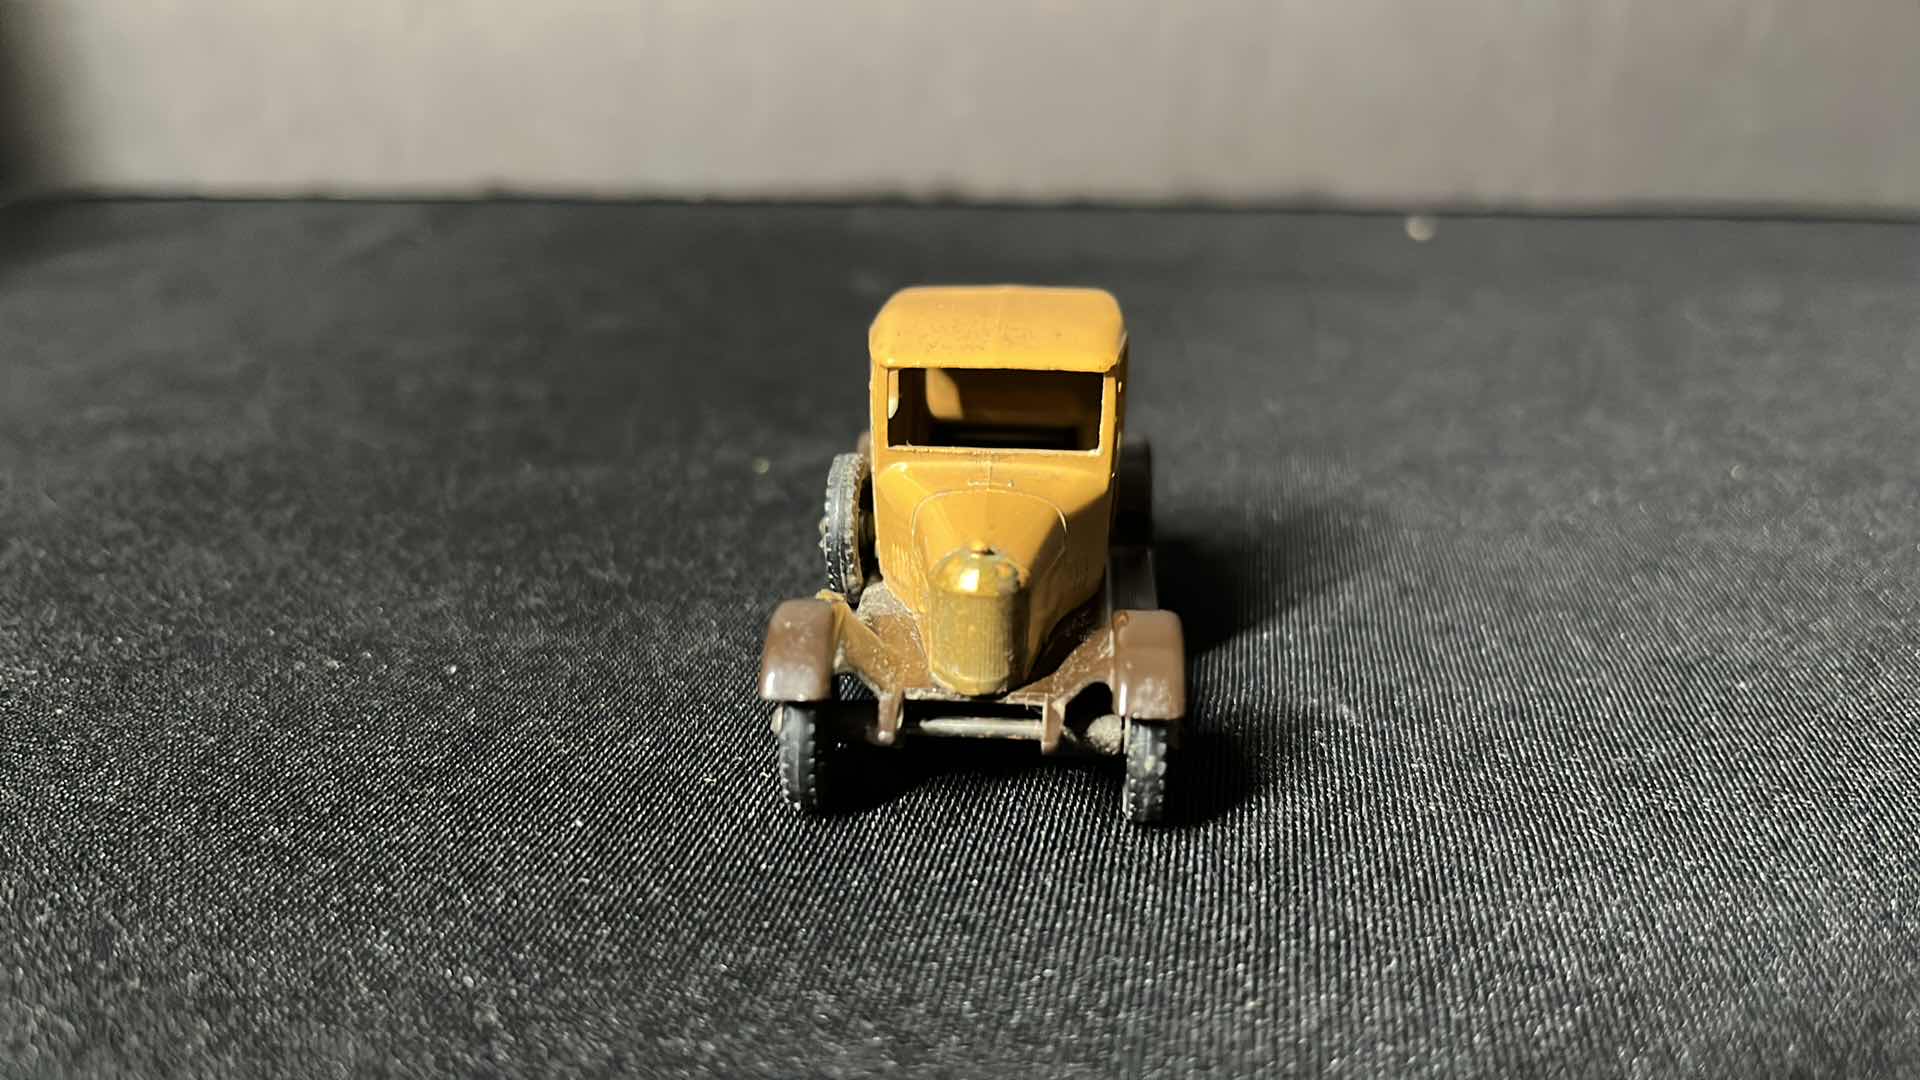 Photo 3 of LESNEY DIE-CAST METAL MODELS OF YESTERYEAR SERIES, NO. 8 SCALE MODEL THE BULLNOSE MORRIS’ COWLEY OF 1926, 1956-1961